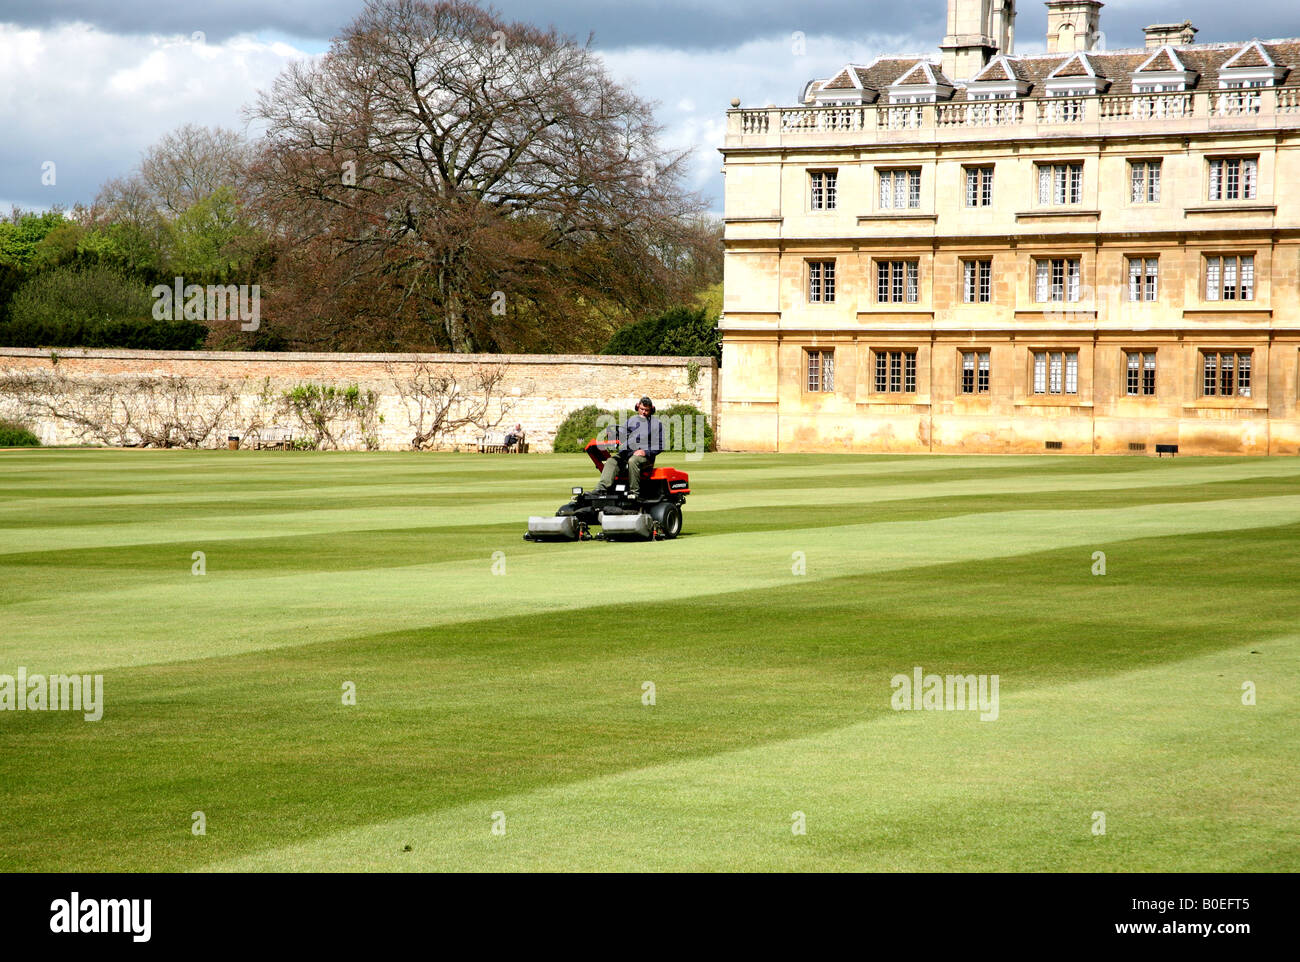 Groundsman mows lawns at Cambridge college using high tech lawnmower Stock Photo